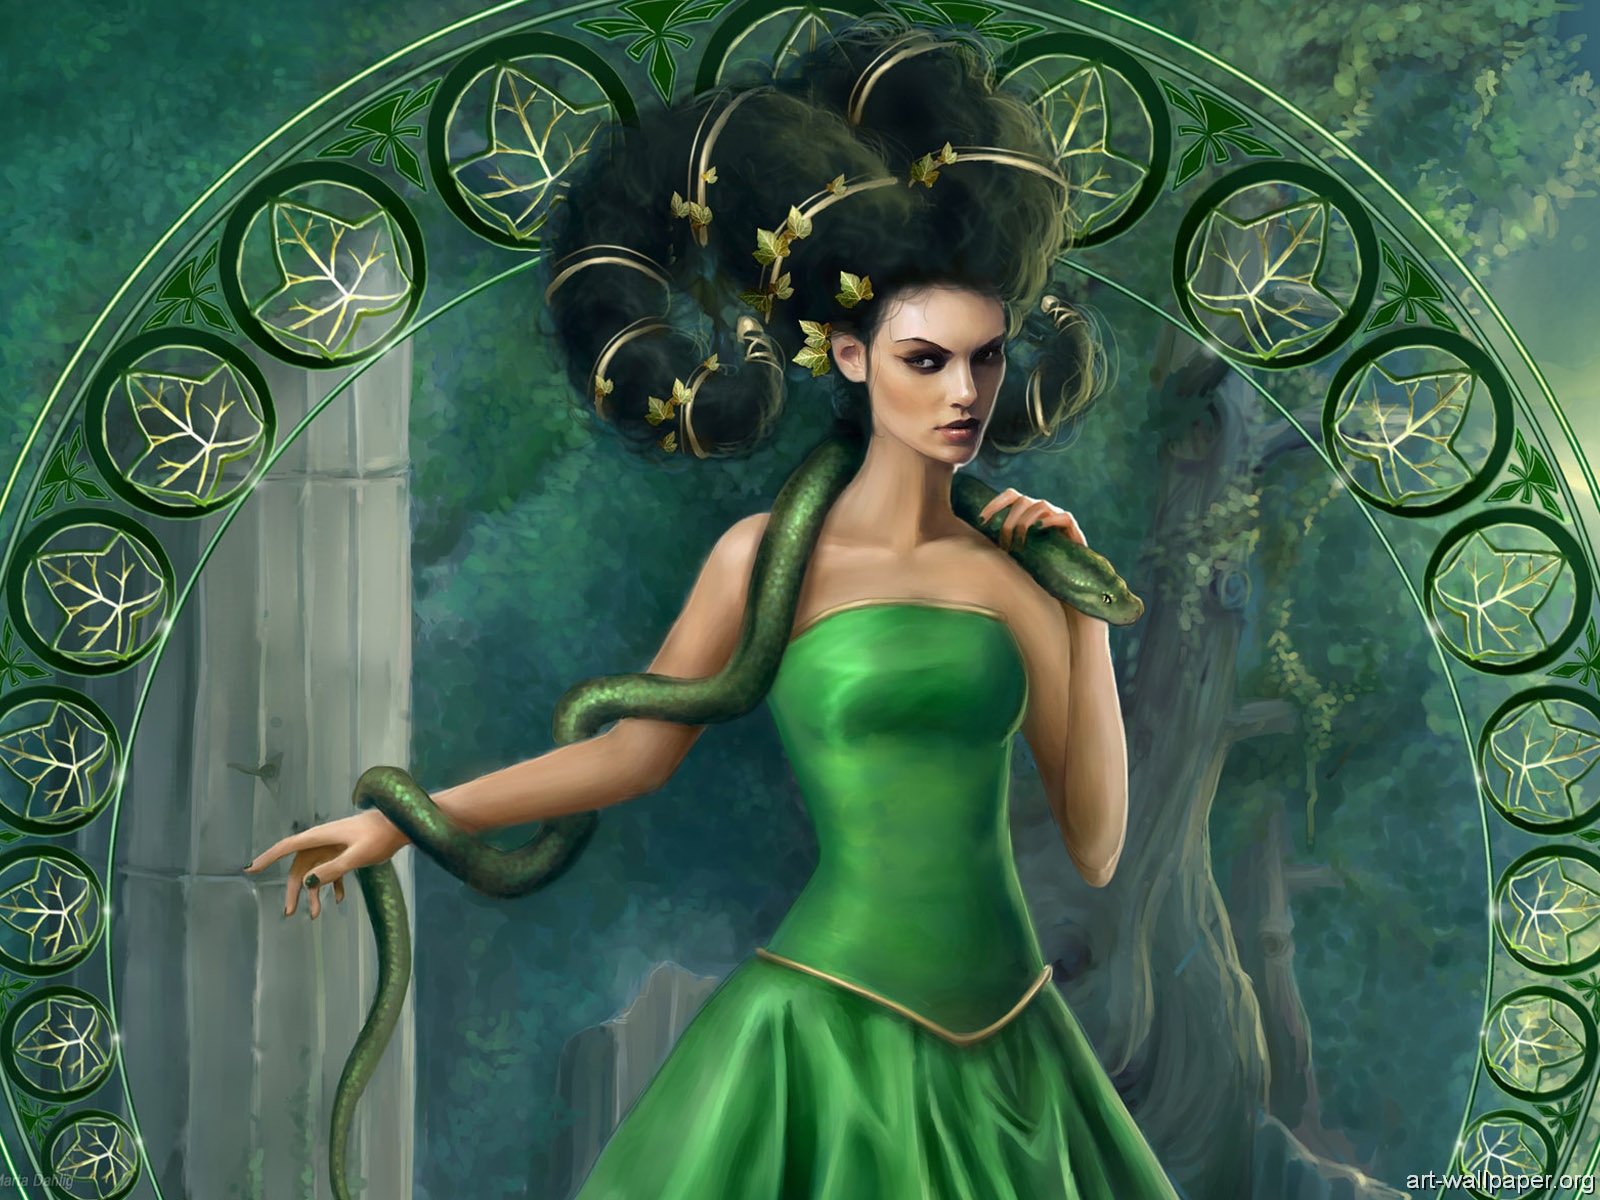 Green dress with vibrant colors - Evil Thoughts by Marta Dahlig